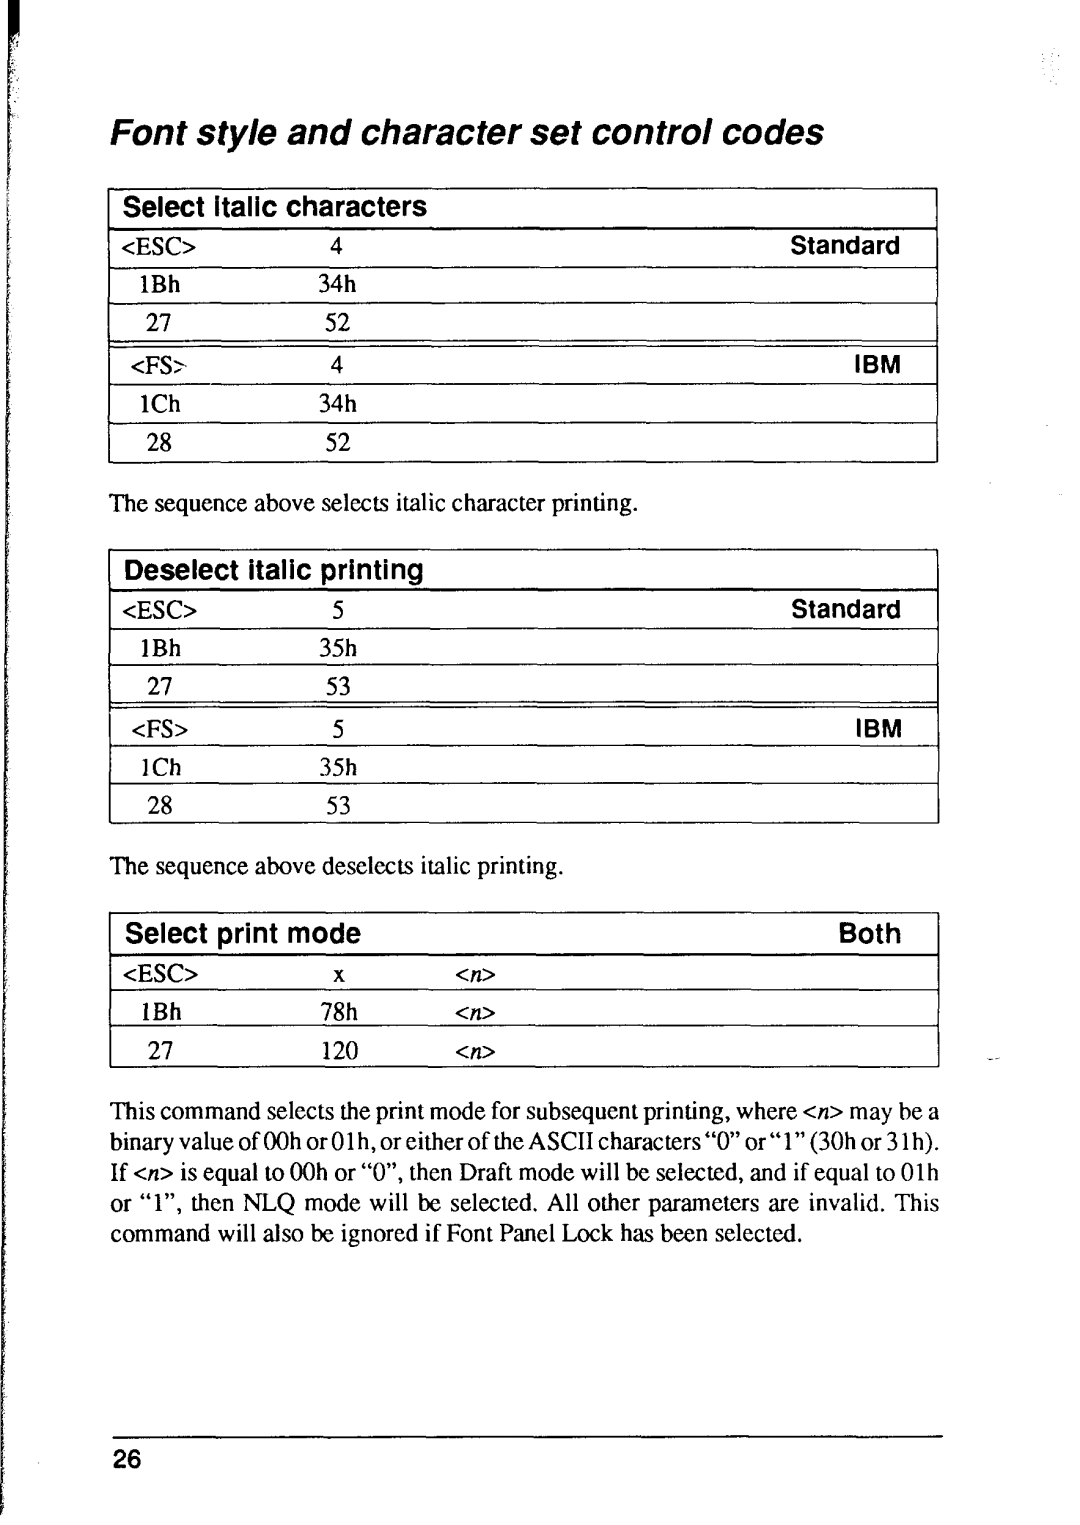 Star Micronics XR-1500 Font style and character set control codes, Select italic, characters, Deselect italic printing 